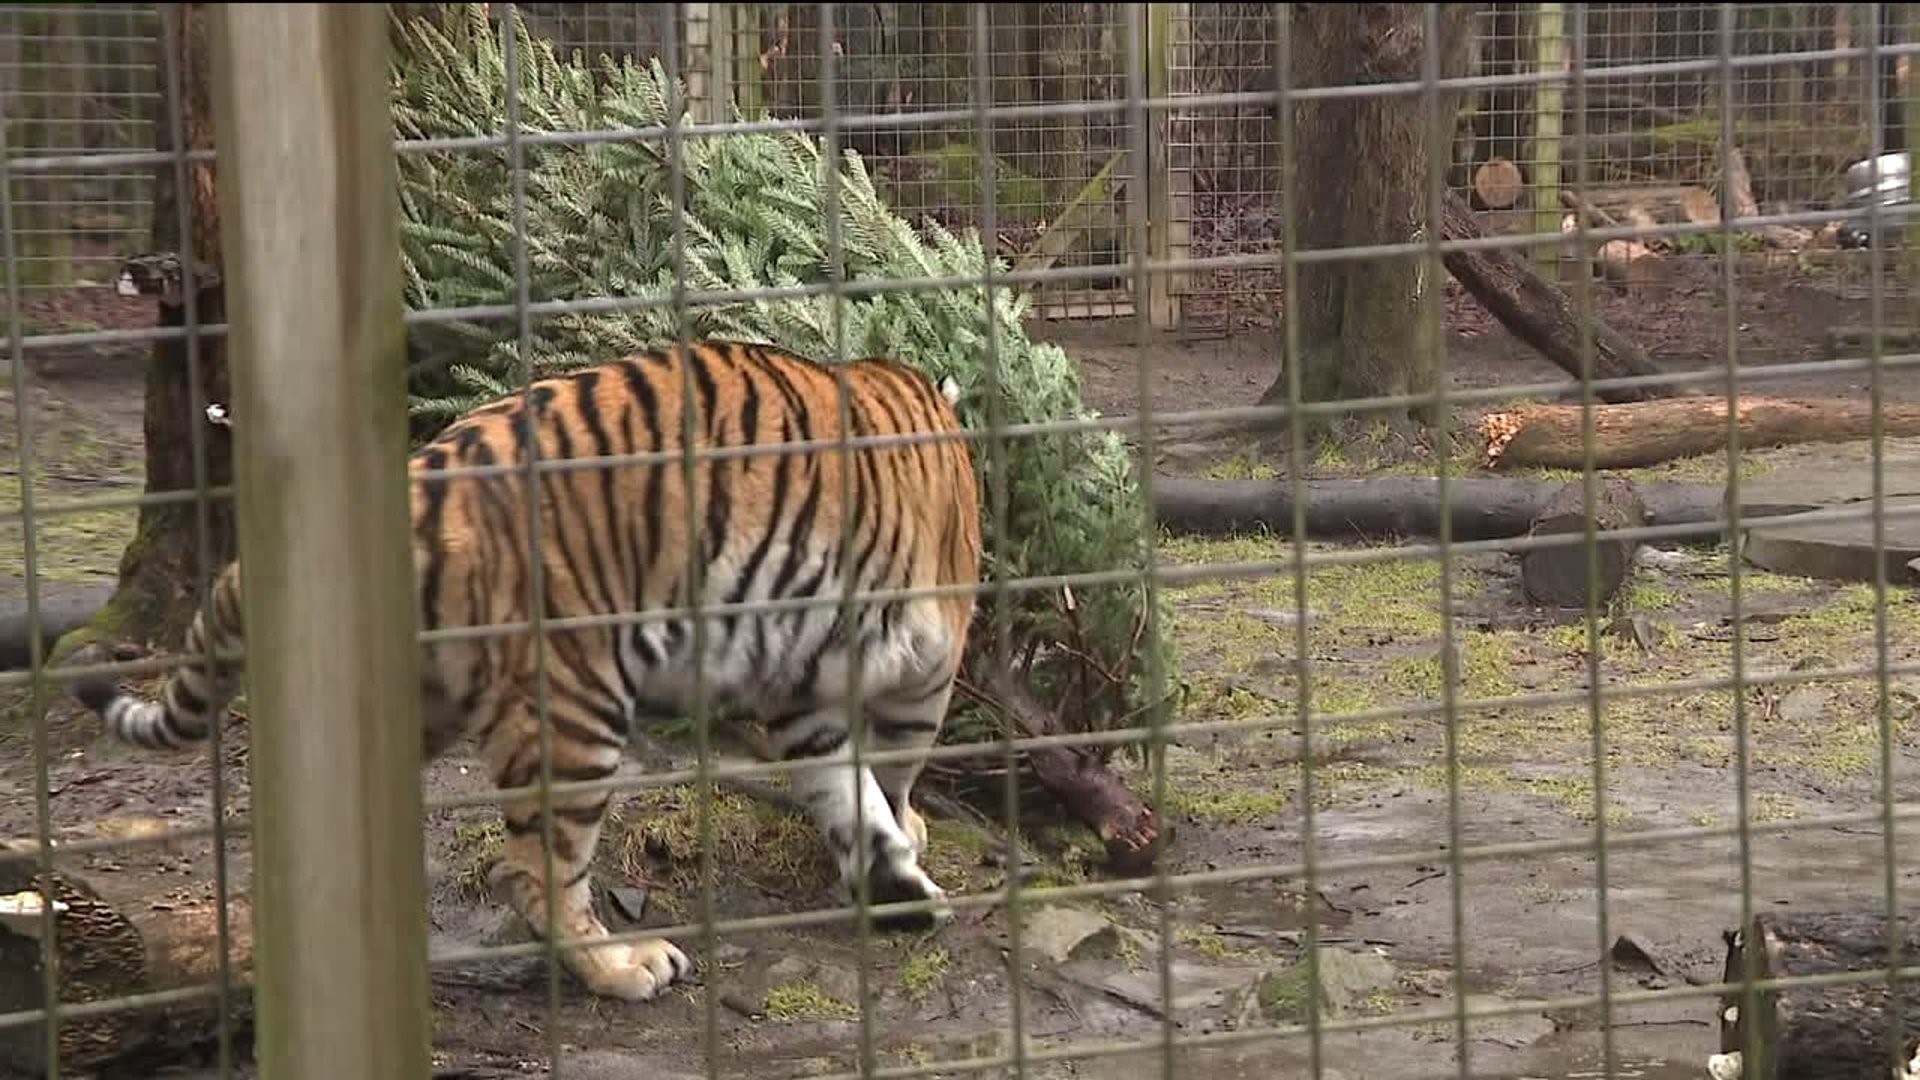 Call for Christmas Trees at Local Zoo